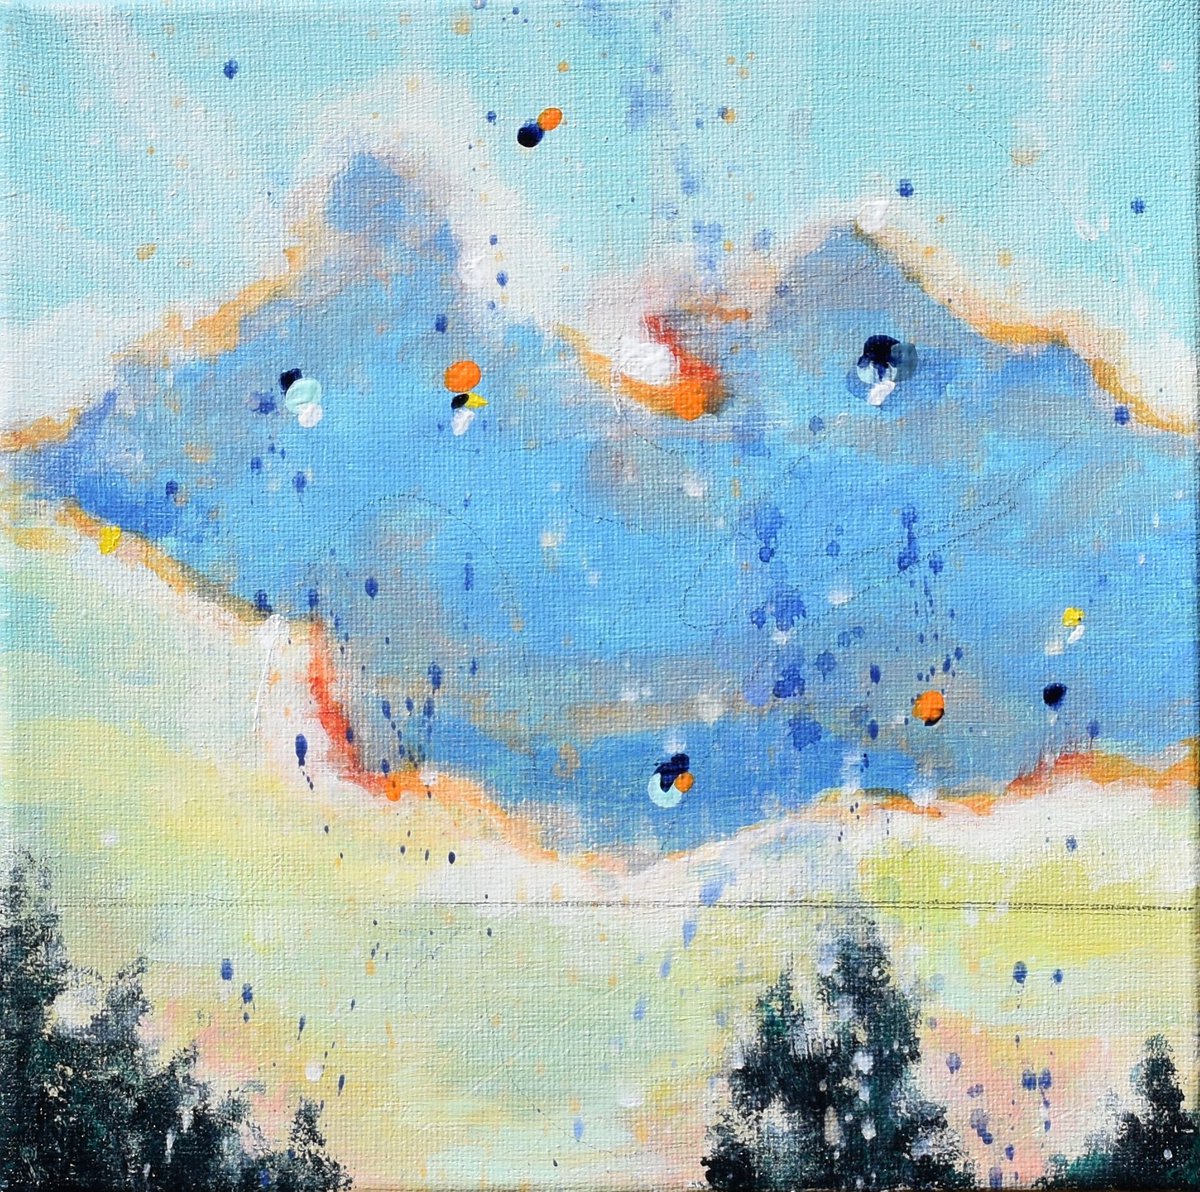 Emergence - Abstract Art - 8 x 8 IN / 20 x 20 CM - Cloud Painting on Canvas, Ready to Hang by Cynthia Ligeros Abstract Artist